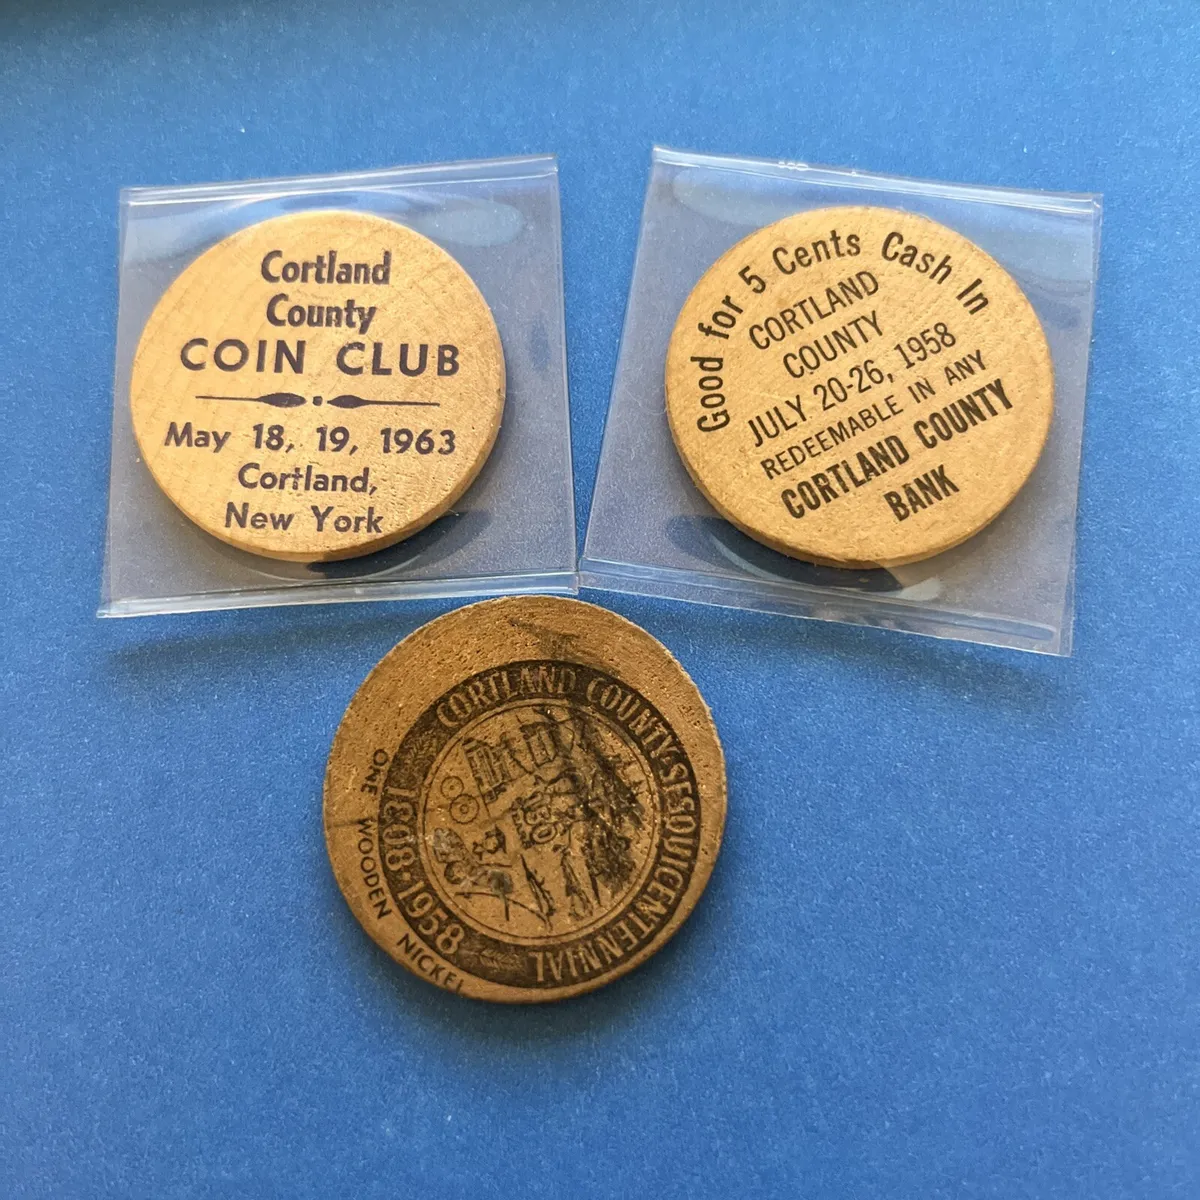 Finding a coin club | Page 2 | Coin Talk